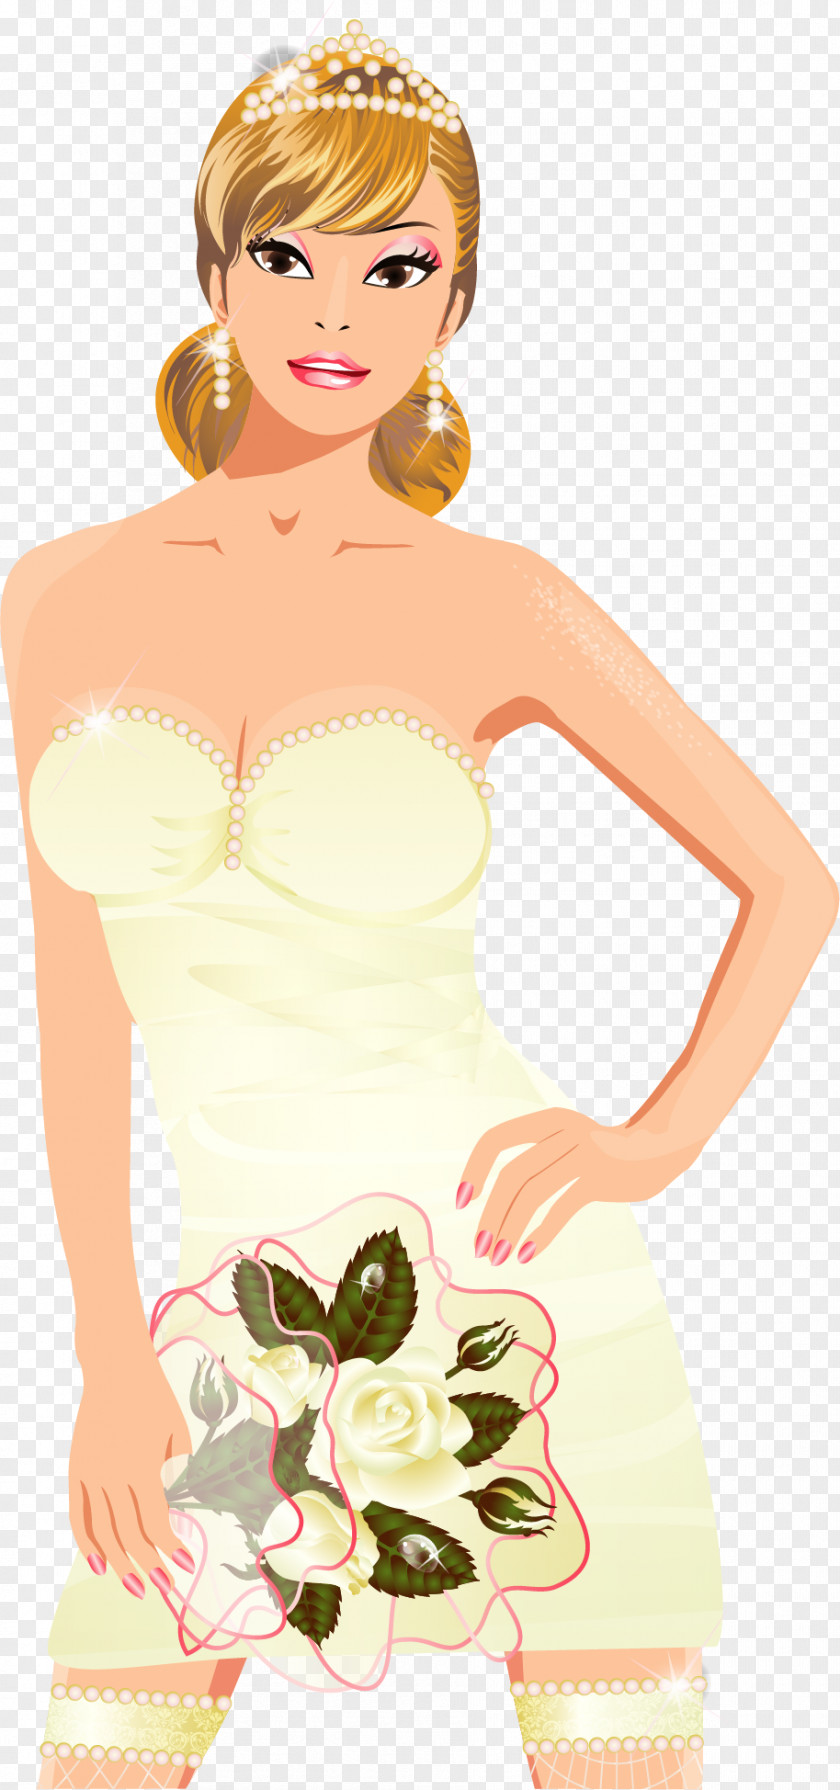 Vector Hand-painted Bride Illustration PNG